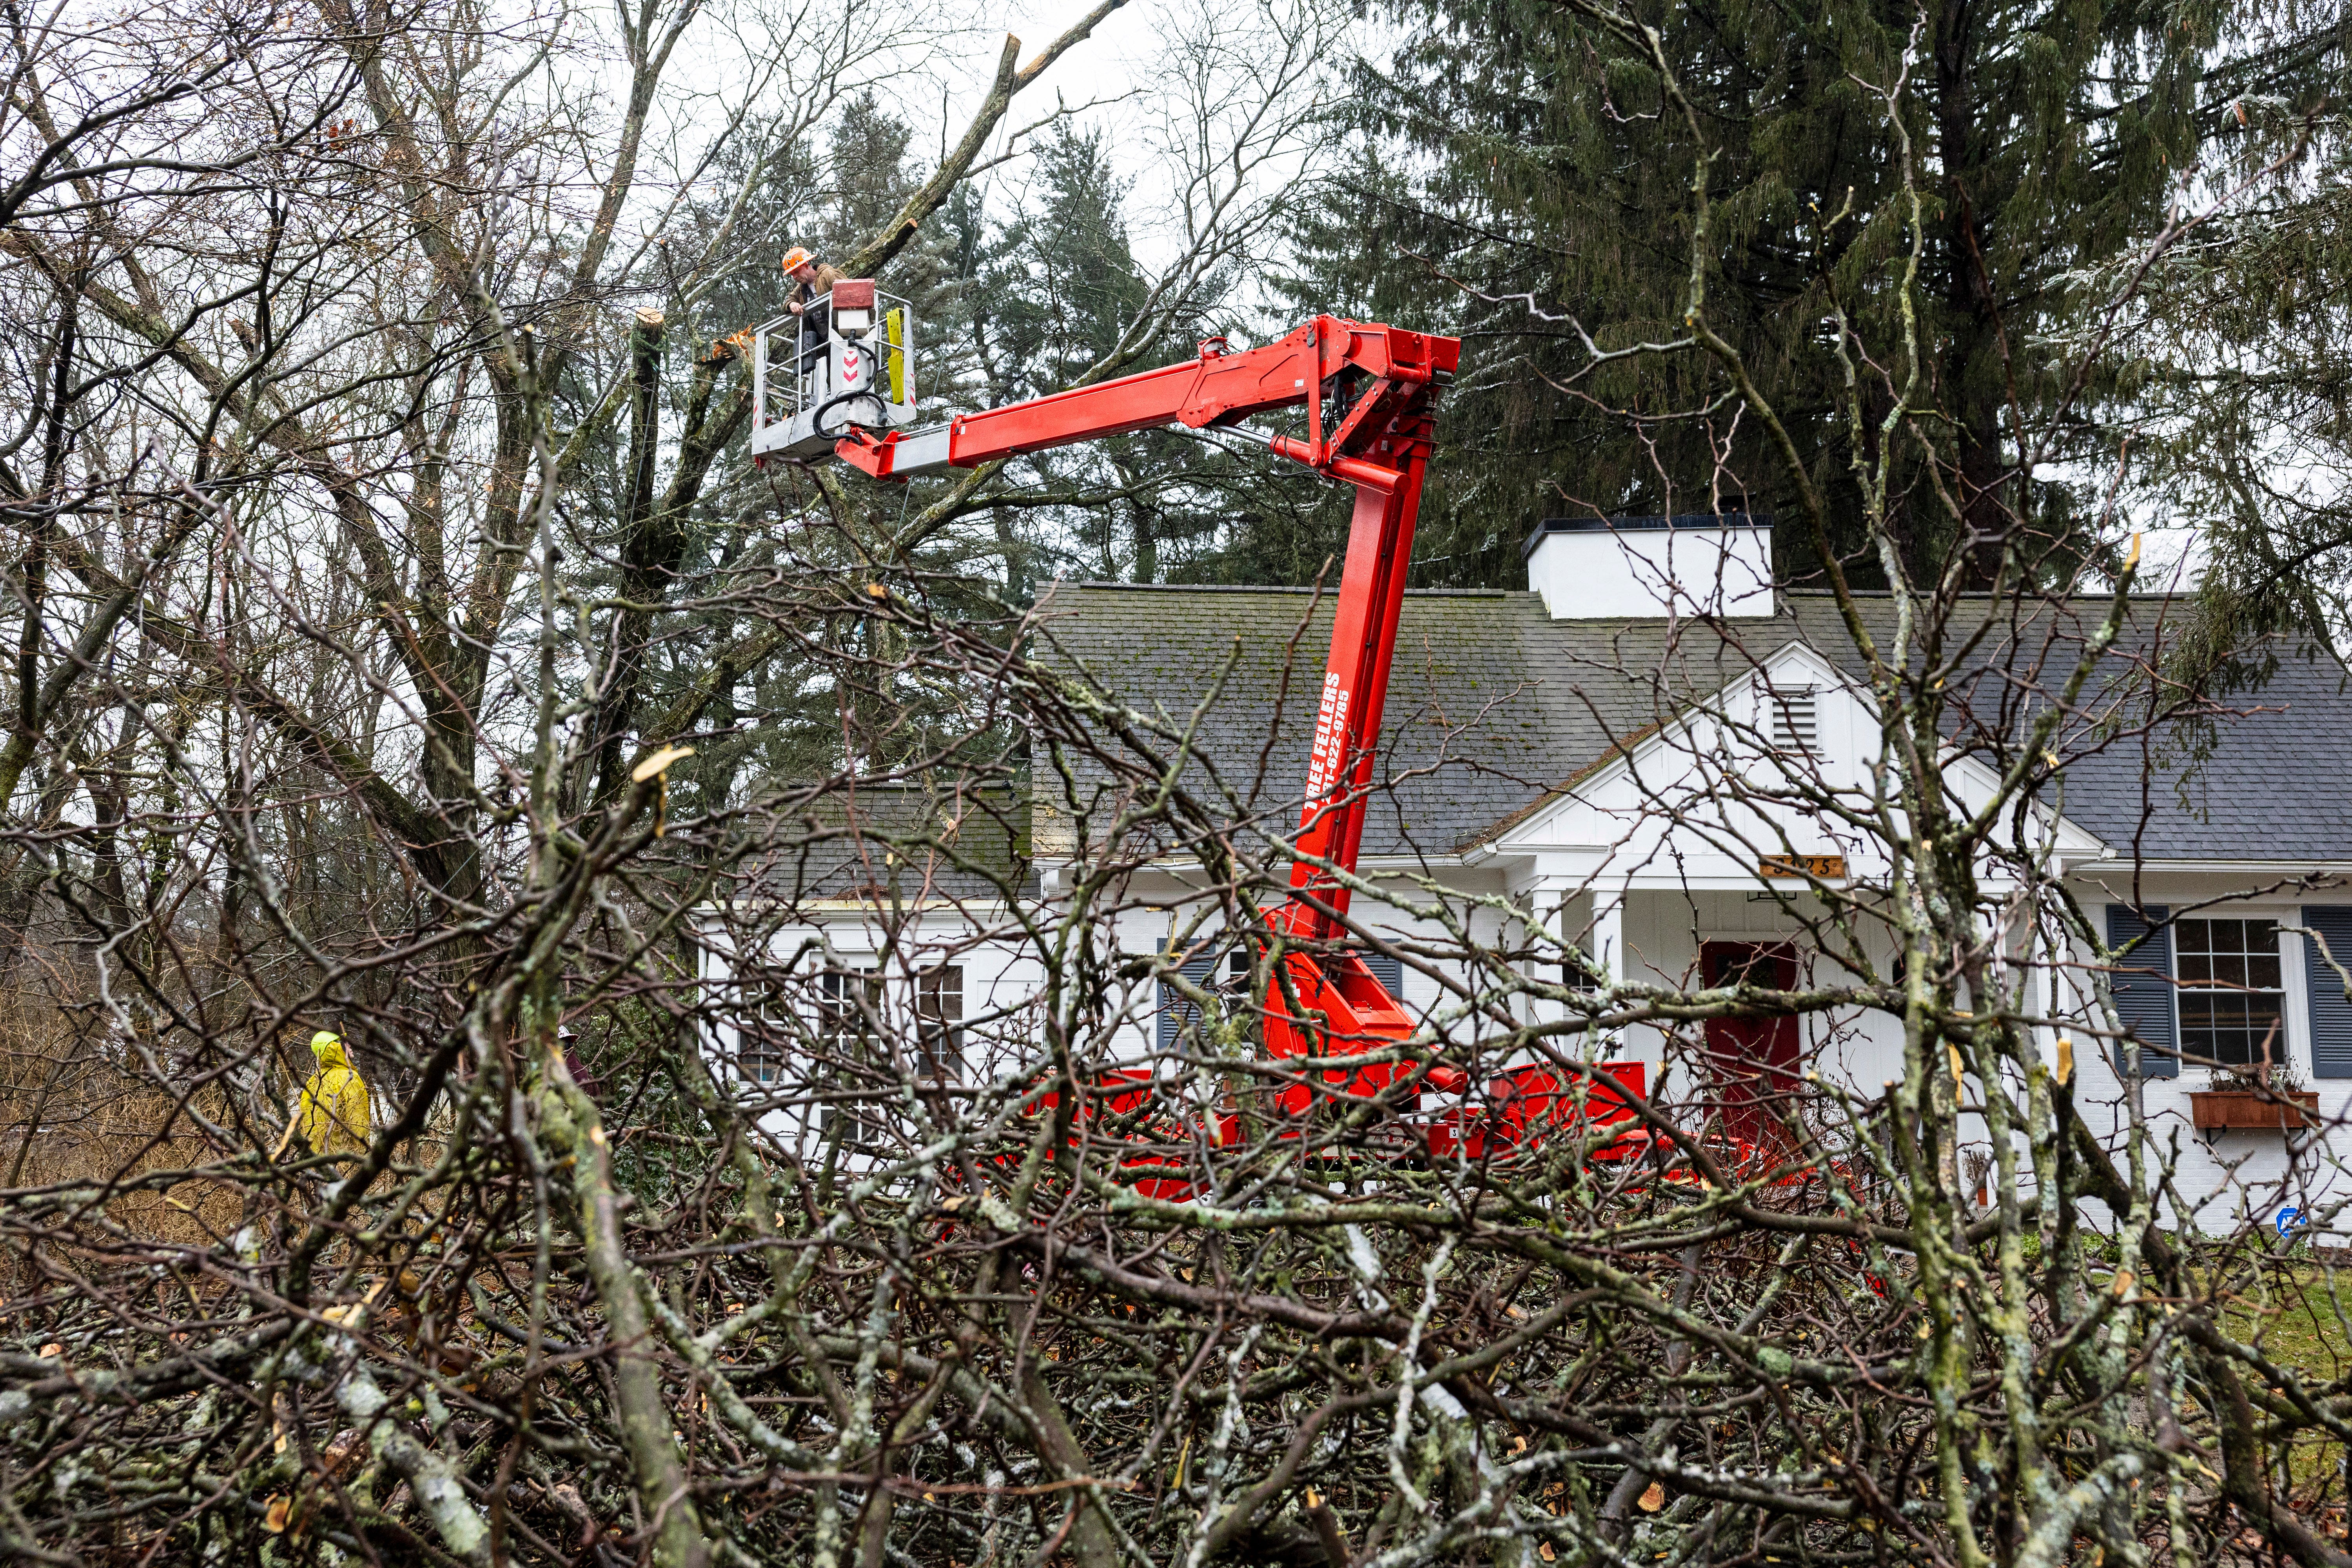 Crews remove a tree dangling over the roof of a home in the Winchell neighborhood following an ice storm in Kalamazoo